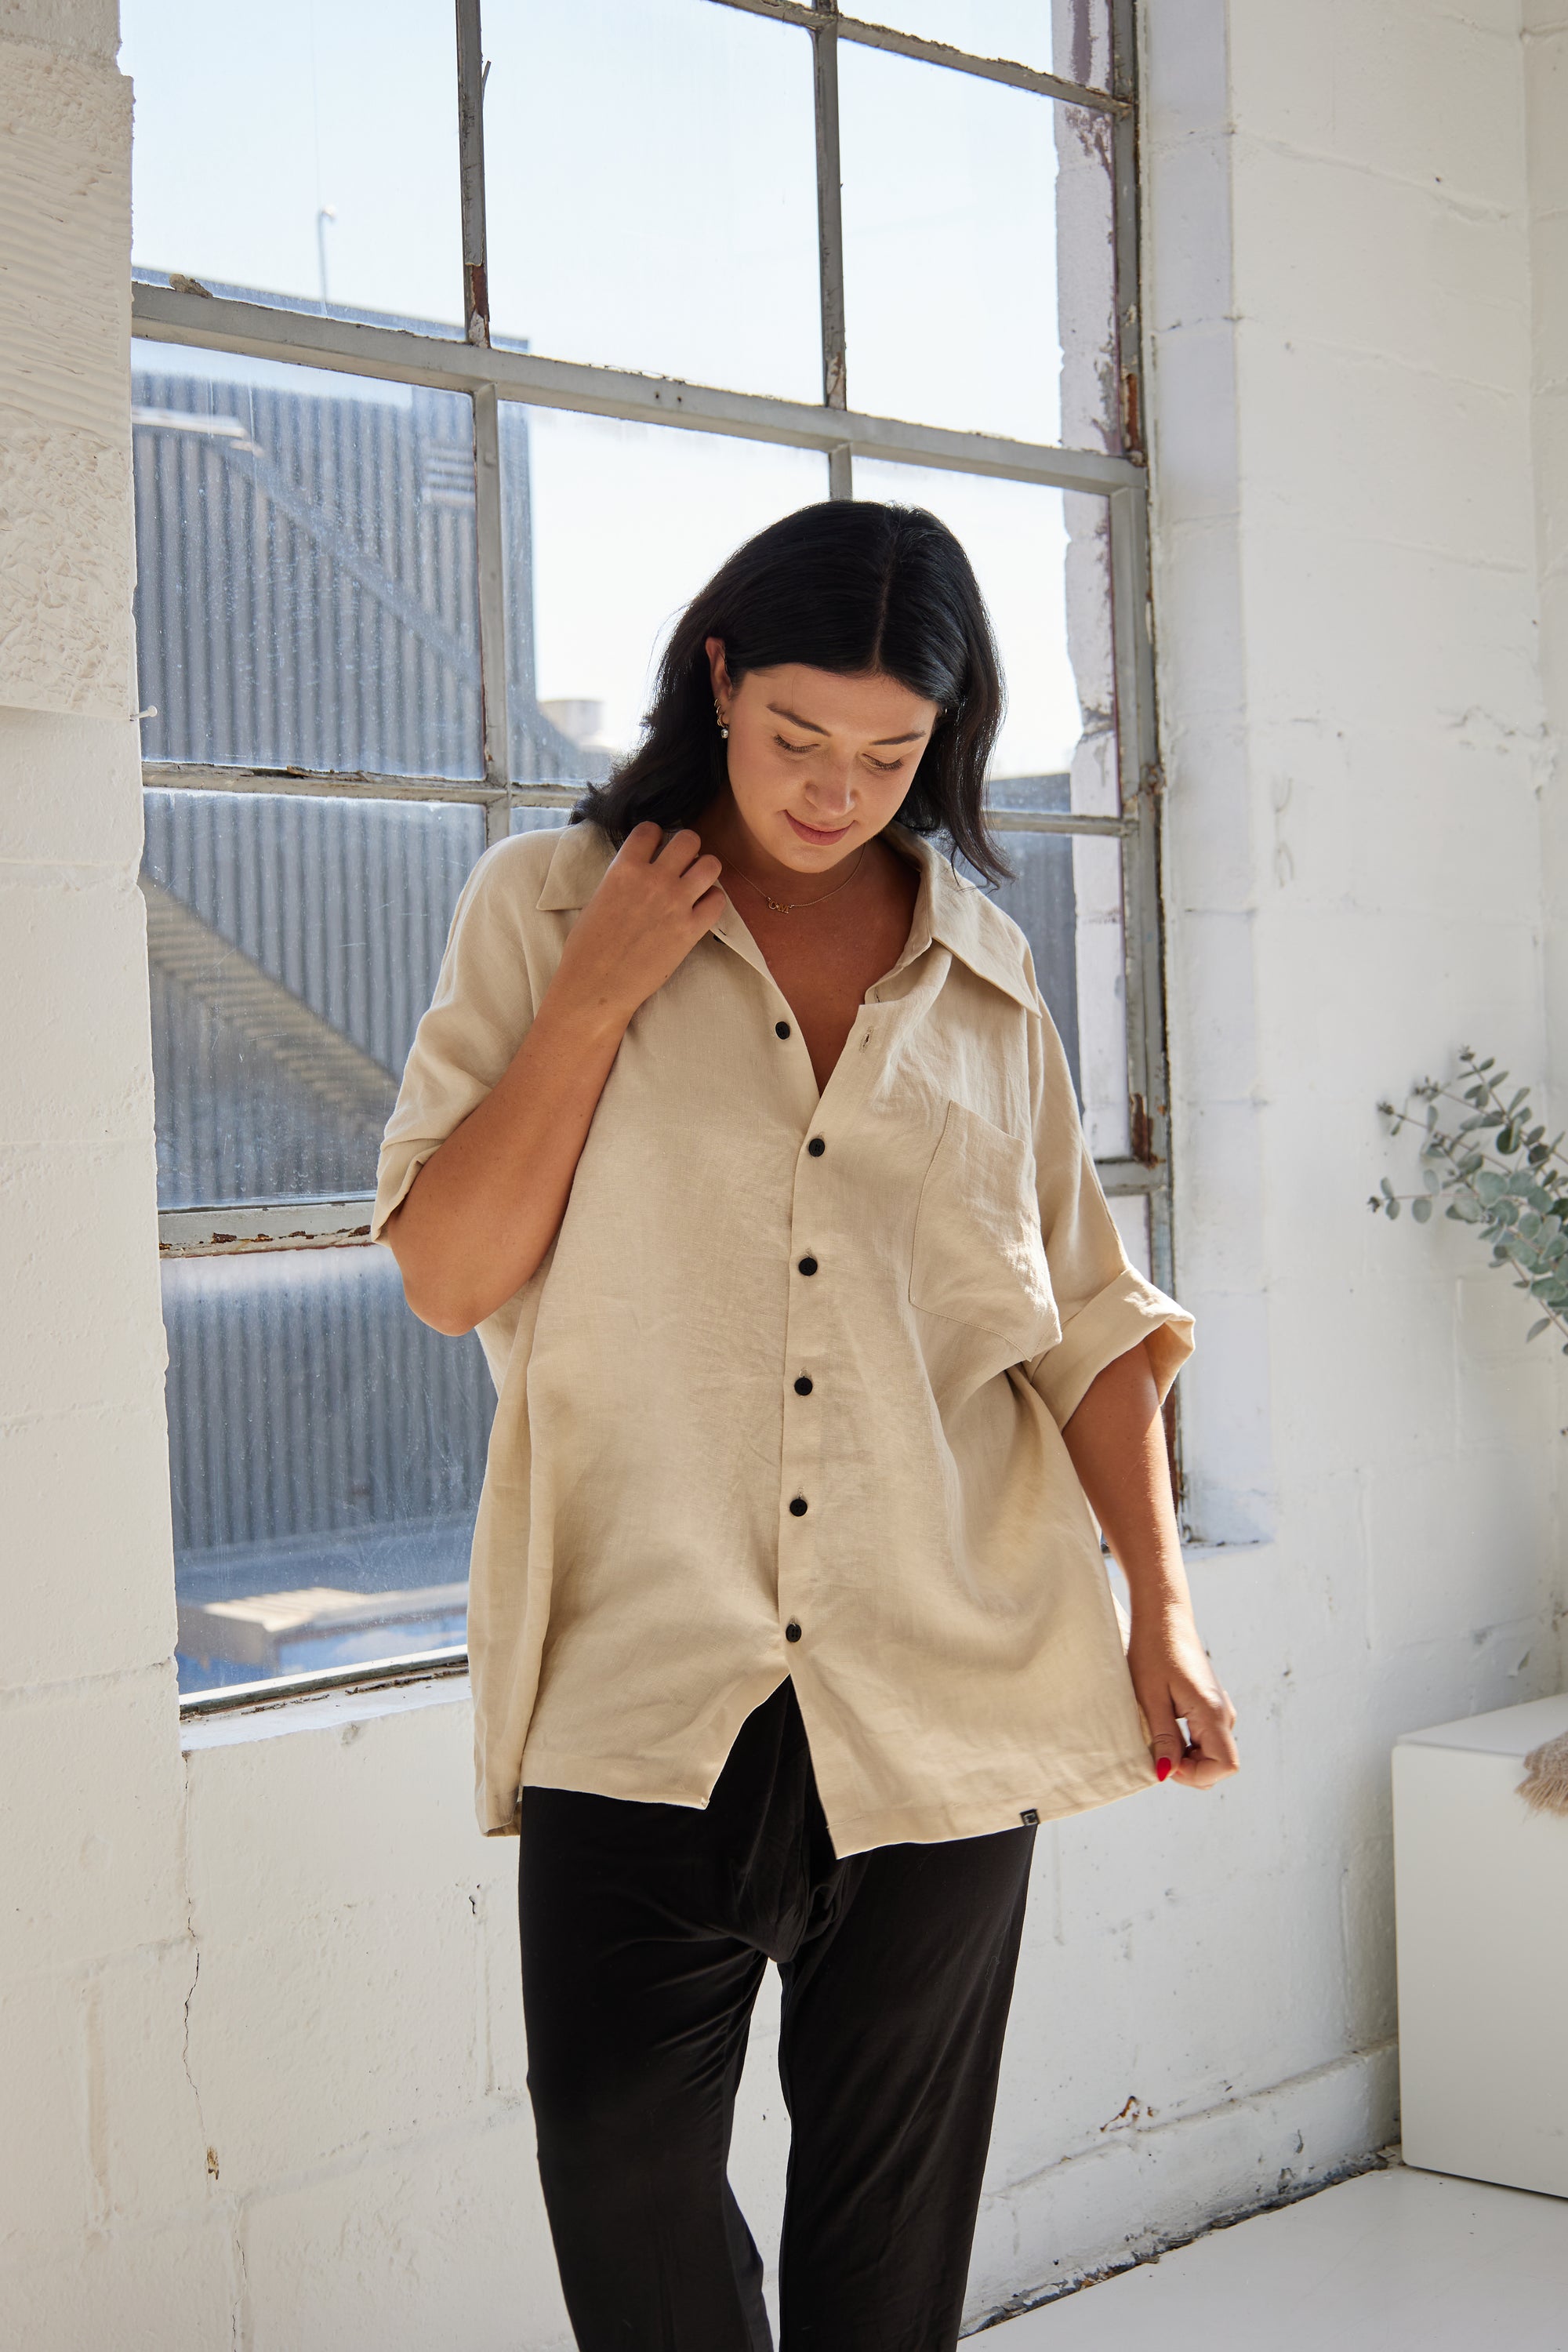 The Shore Top - Linen by Cassandra Elizabeth is an ethically made, minimalist wardrobe essential, and is the epitome of quiet luxury.